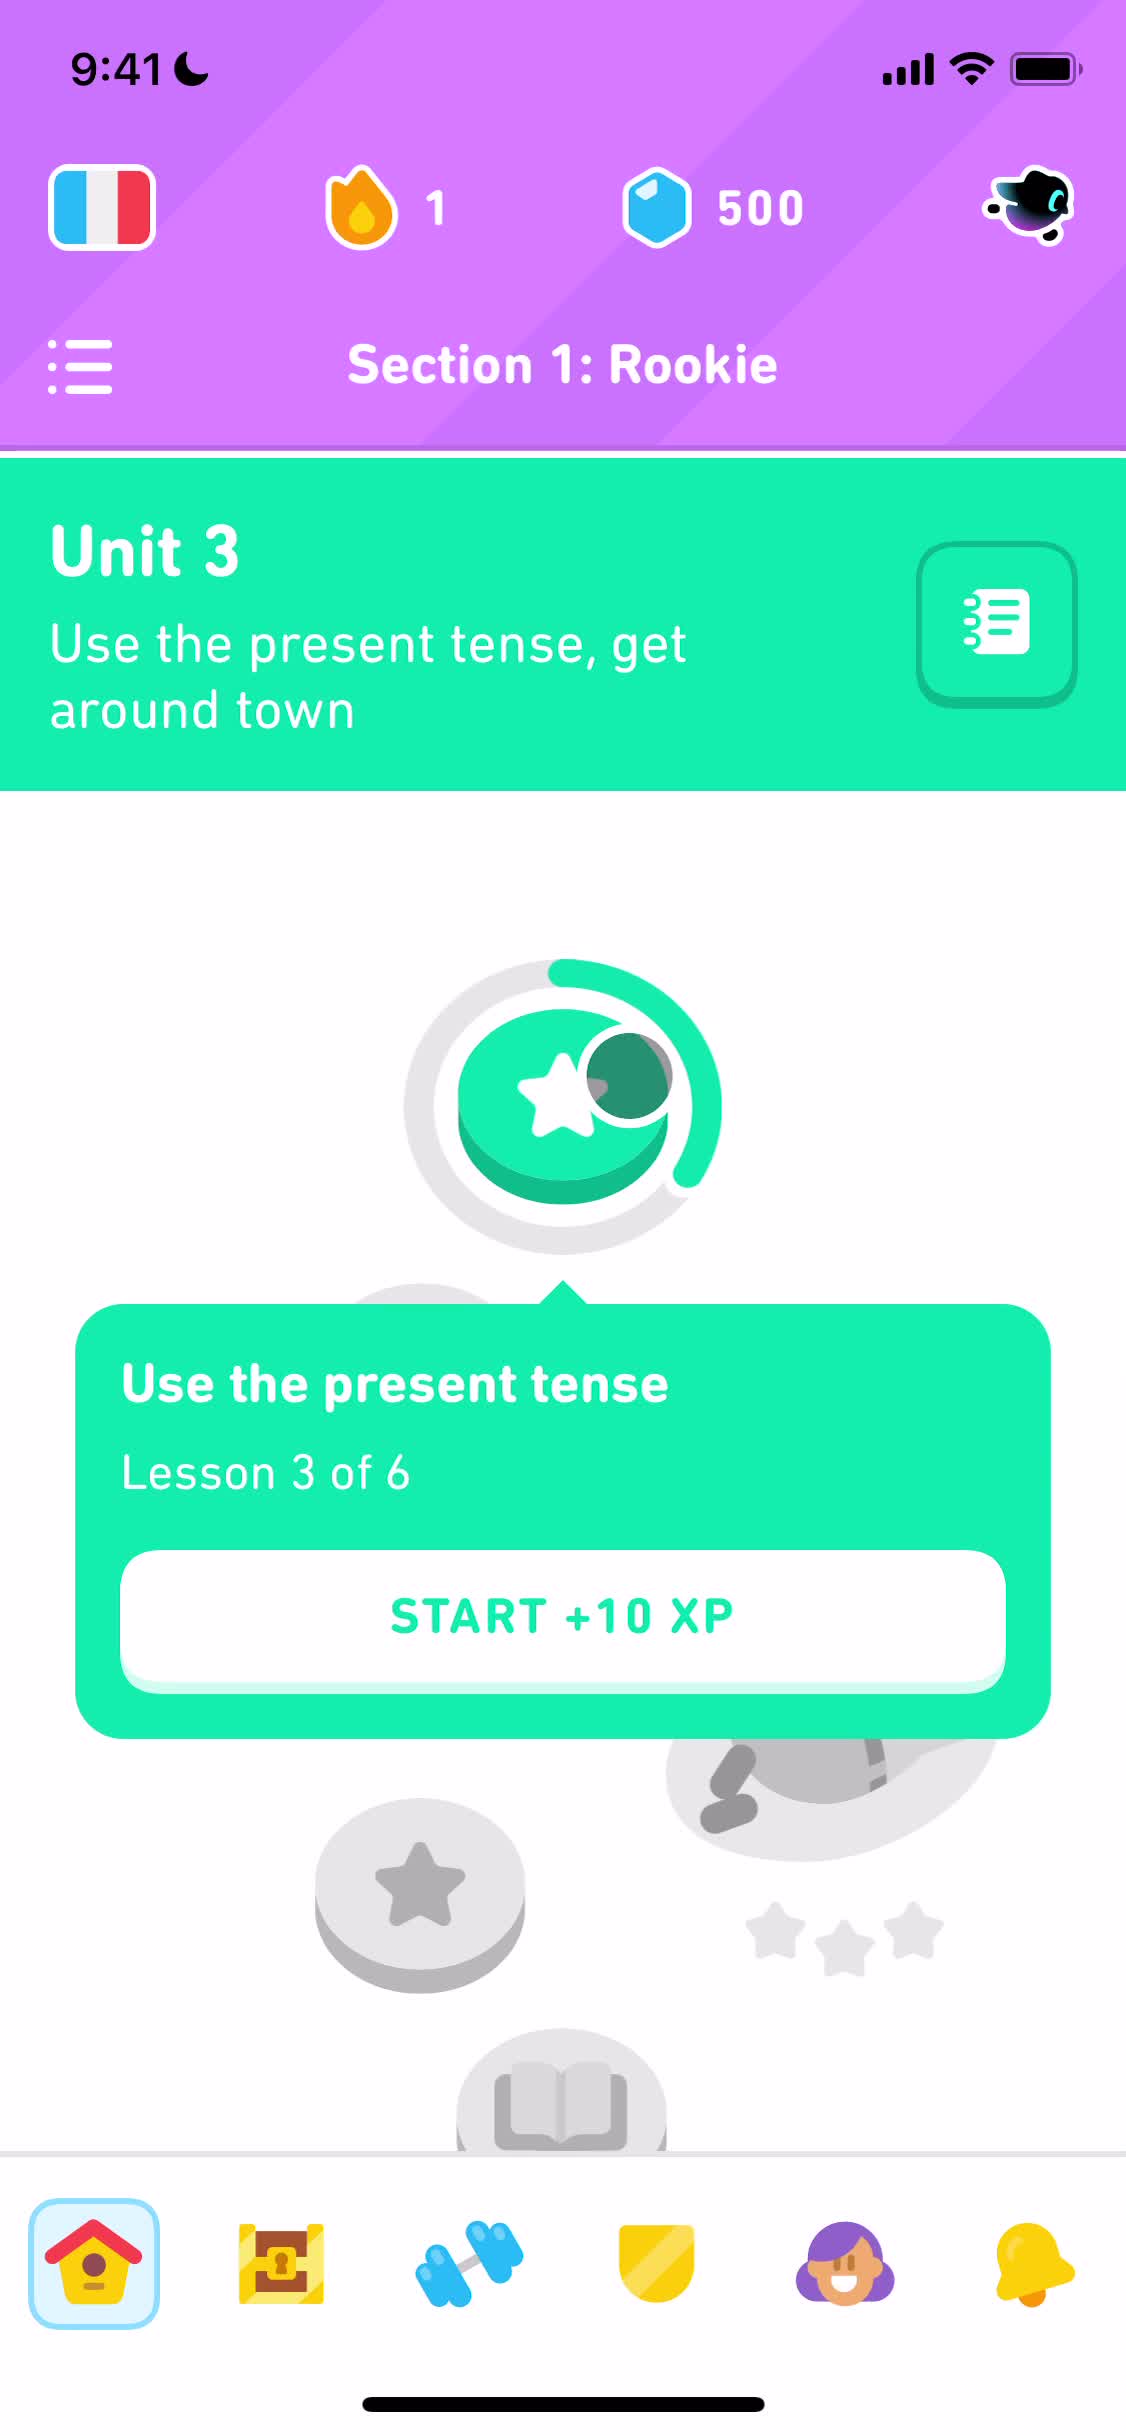 Screenshot of Start quiz on Completing a level on Duolingo user flow